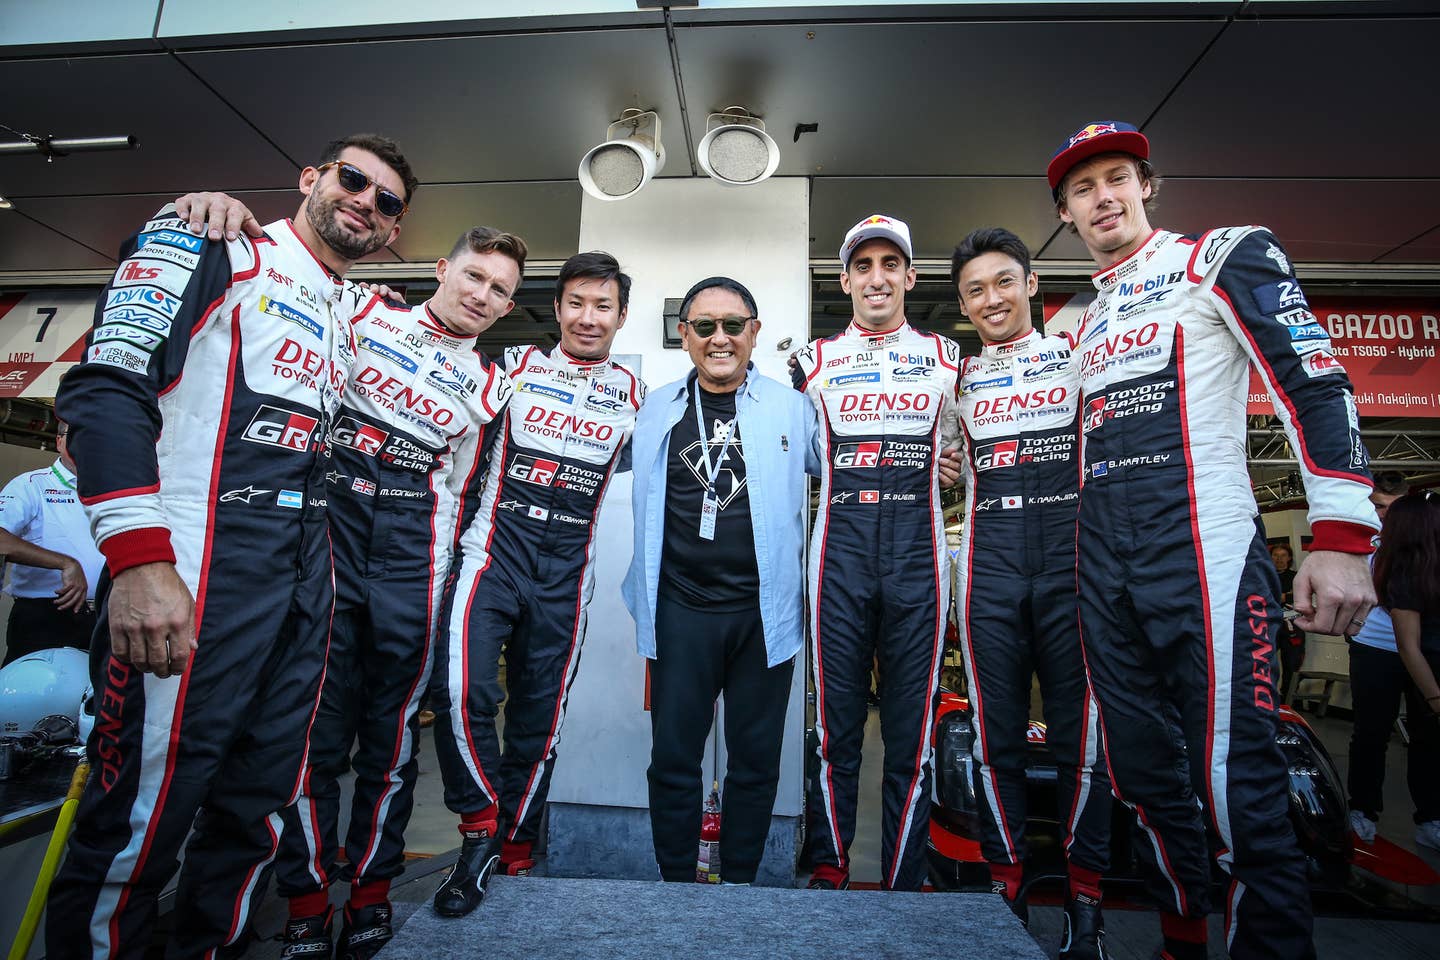 FUJI, JAPAN - OCTOBER 06: (L to R): Jose Maria Lopez of Argentina and Toyota Gazoo Racing; Mike Conway of Great Britain and Toyota Gazoo Racing; Kamui Kobayashi of Japan and Toyota Gazoo Racing; Akio Toyoda of Japan and President of the Toyota Motor Corporation; Sebastien Buemi of Switzerland and Toyota Gazoo Racing; Kazuki Nakajima of Japan and Toyota Gazoo Racing; and Mike Conway of Great Britain and Toyota Gazoo Racing, in the pit lane on October 6, 2019 at the World Endurance Chapionship at Fuji, Japan. (Photo by James Moy Photography/Getty Images)